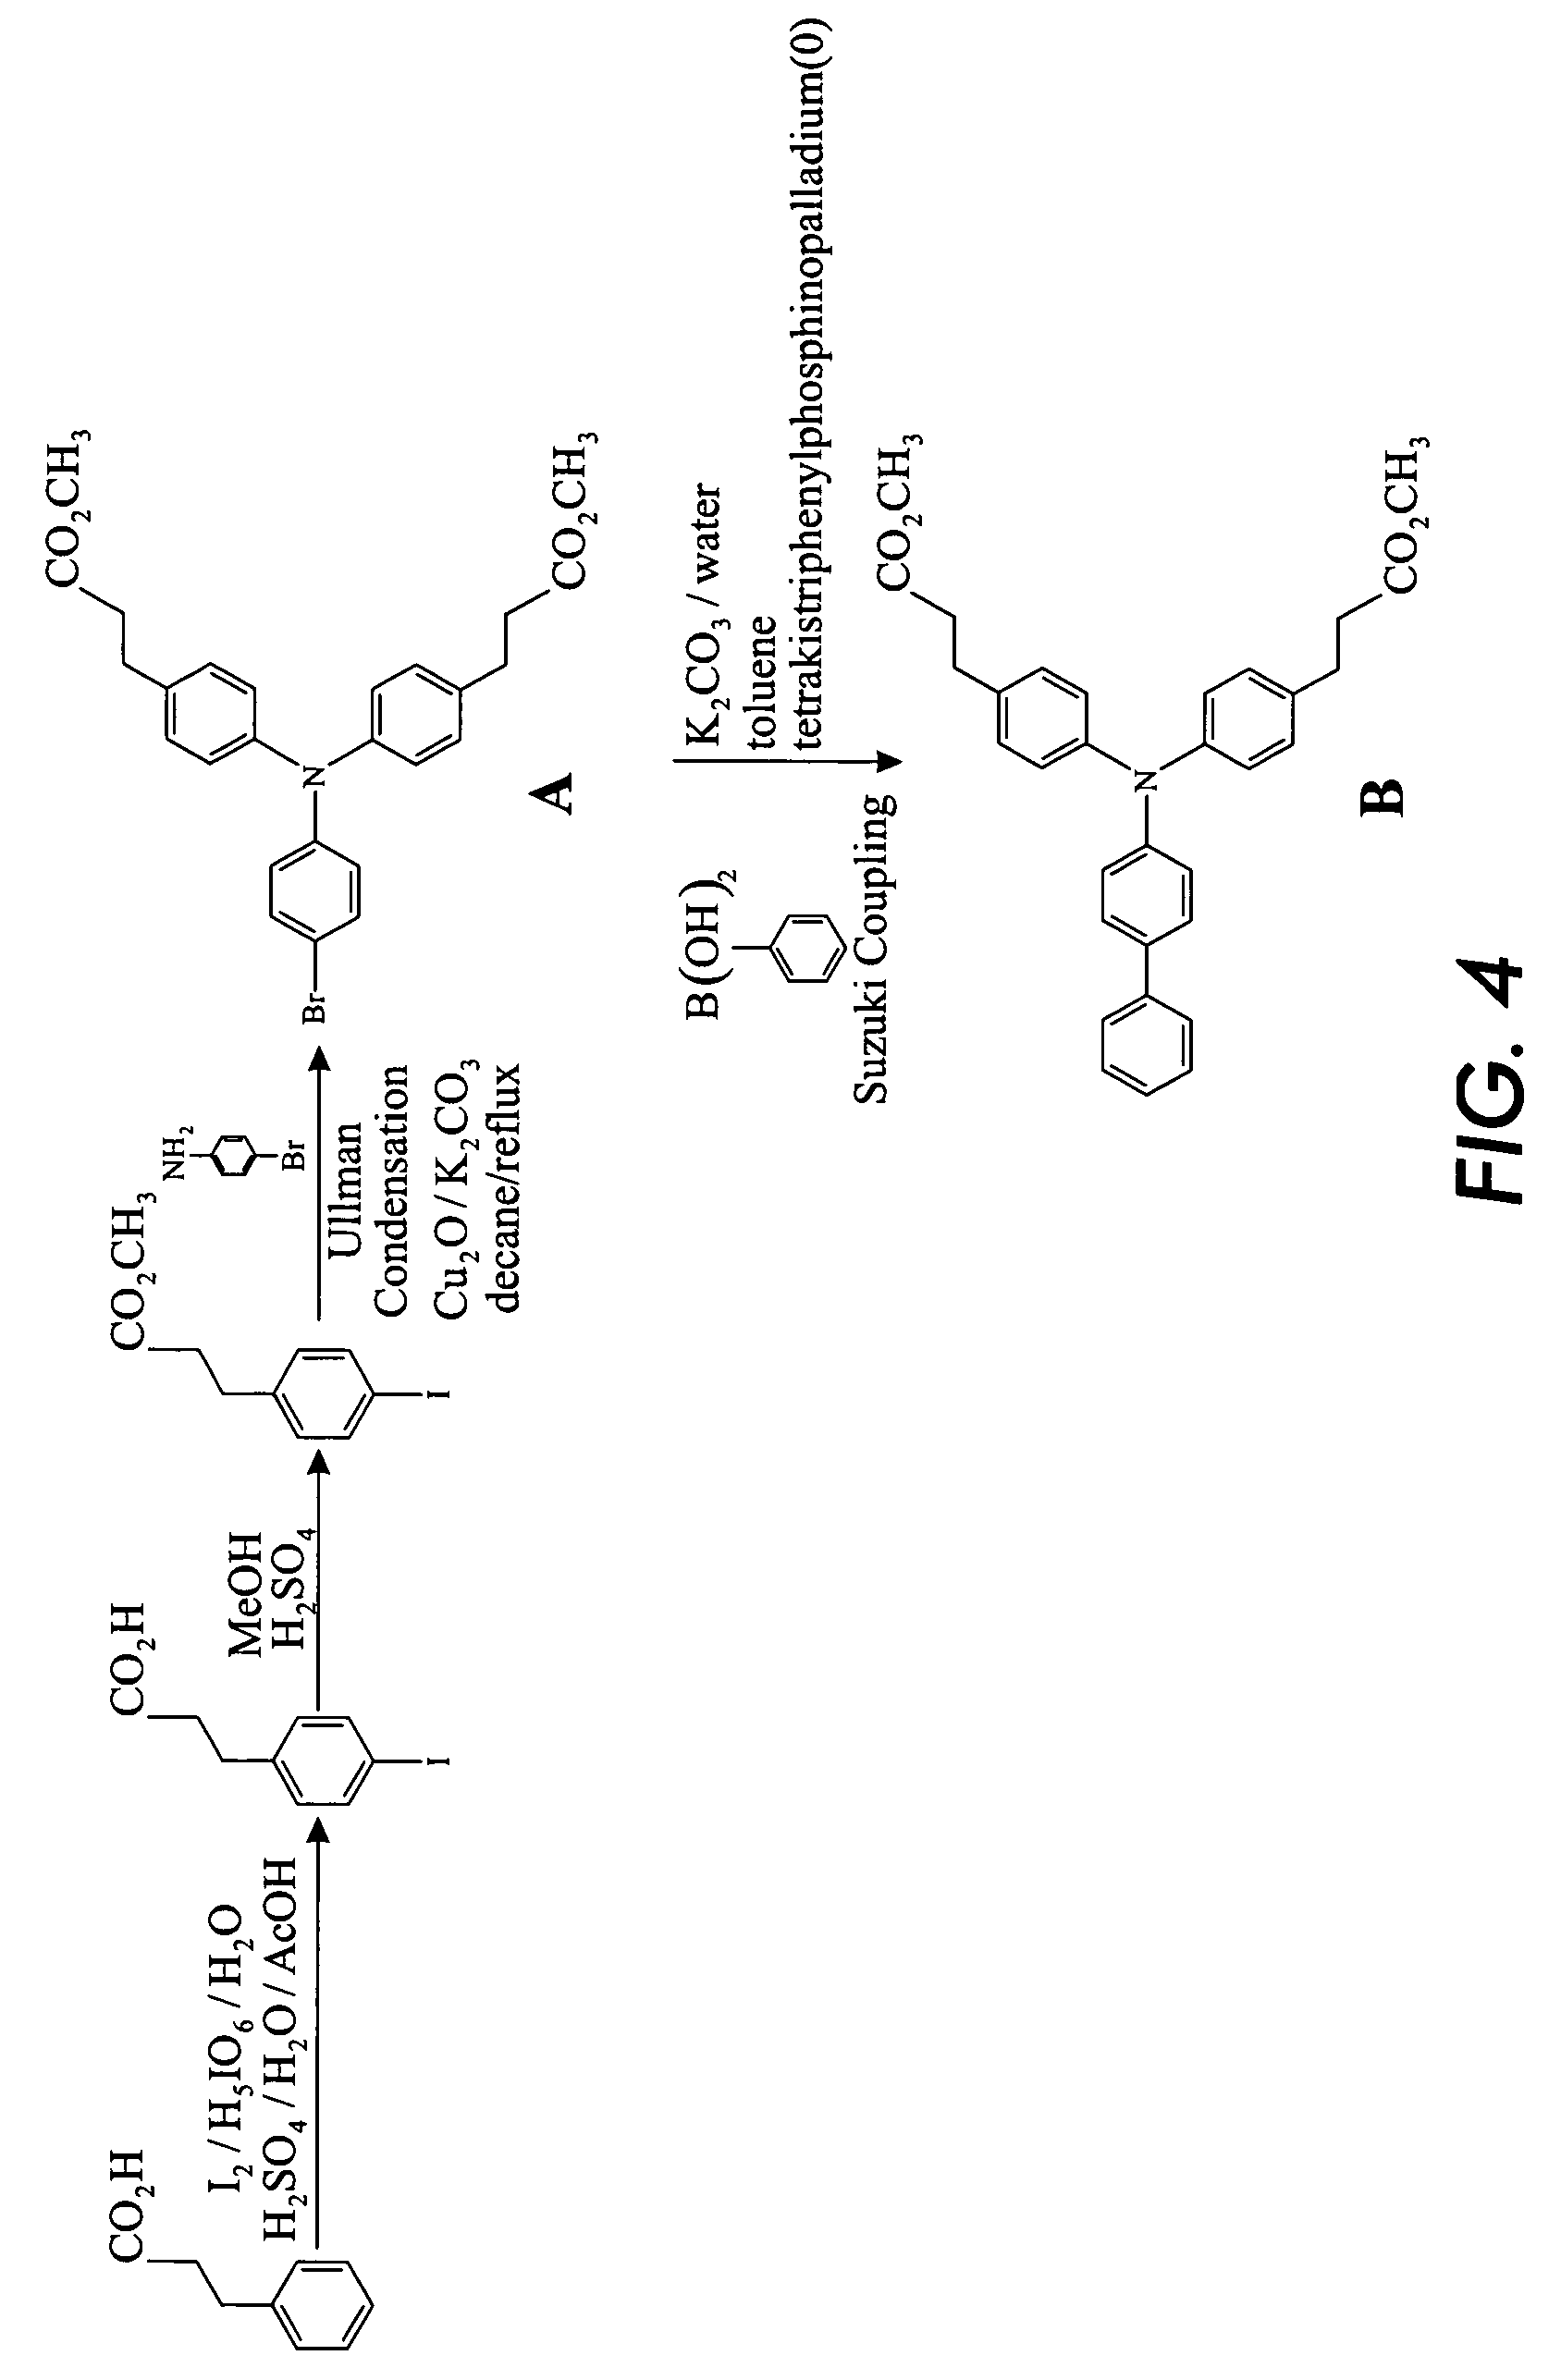 Process for arylamine production